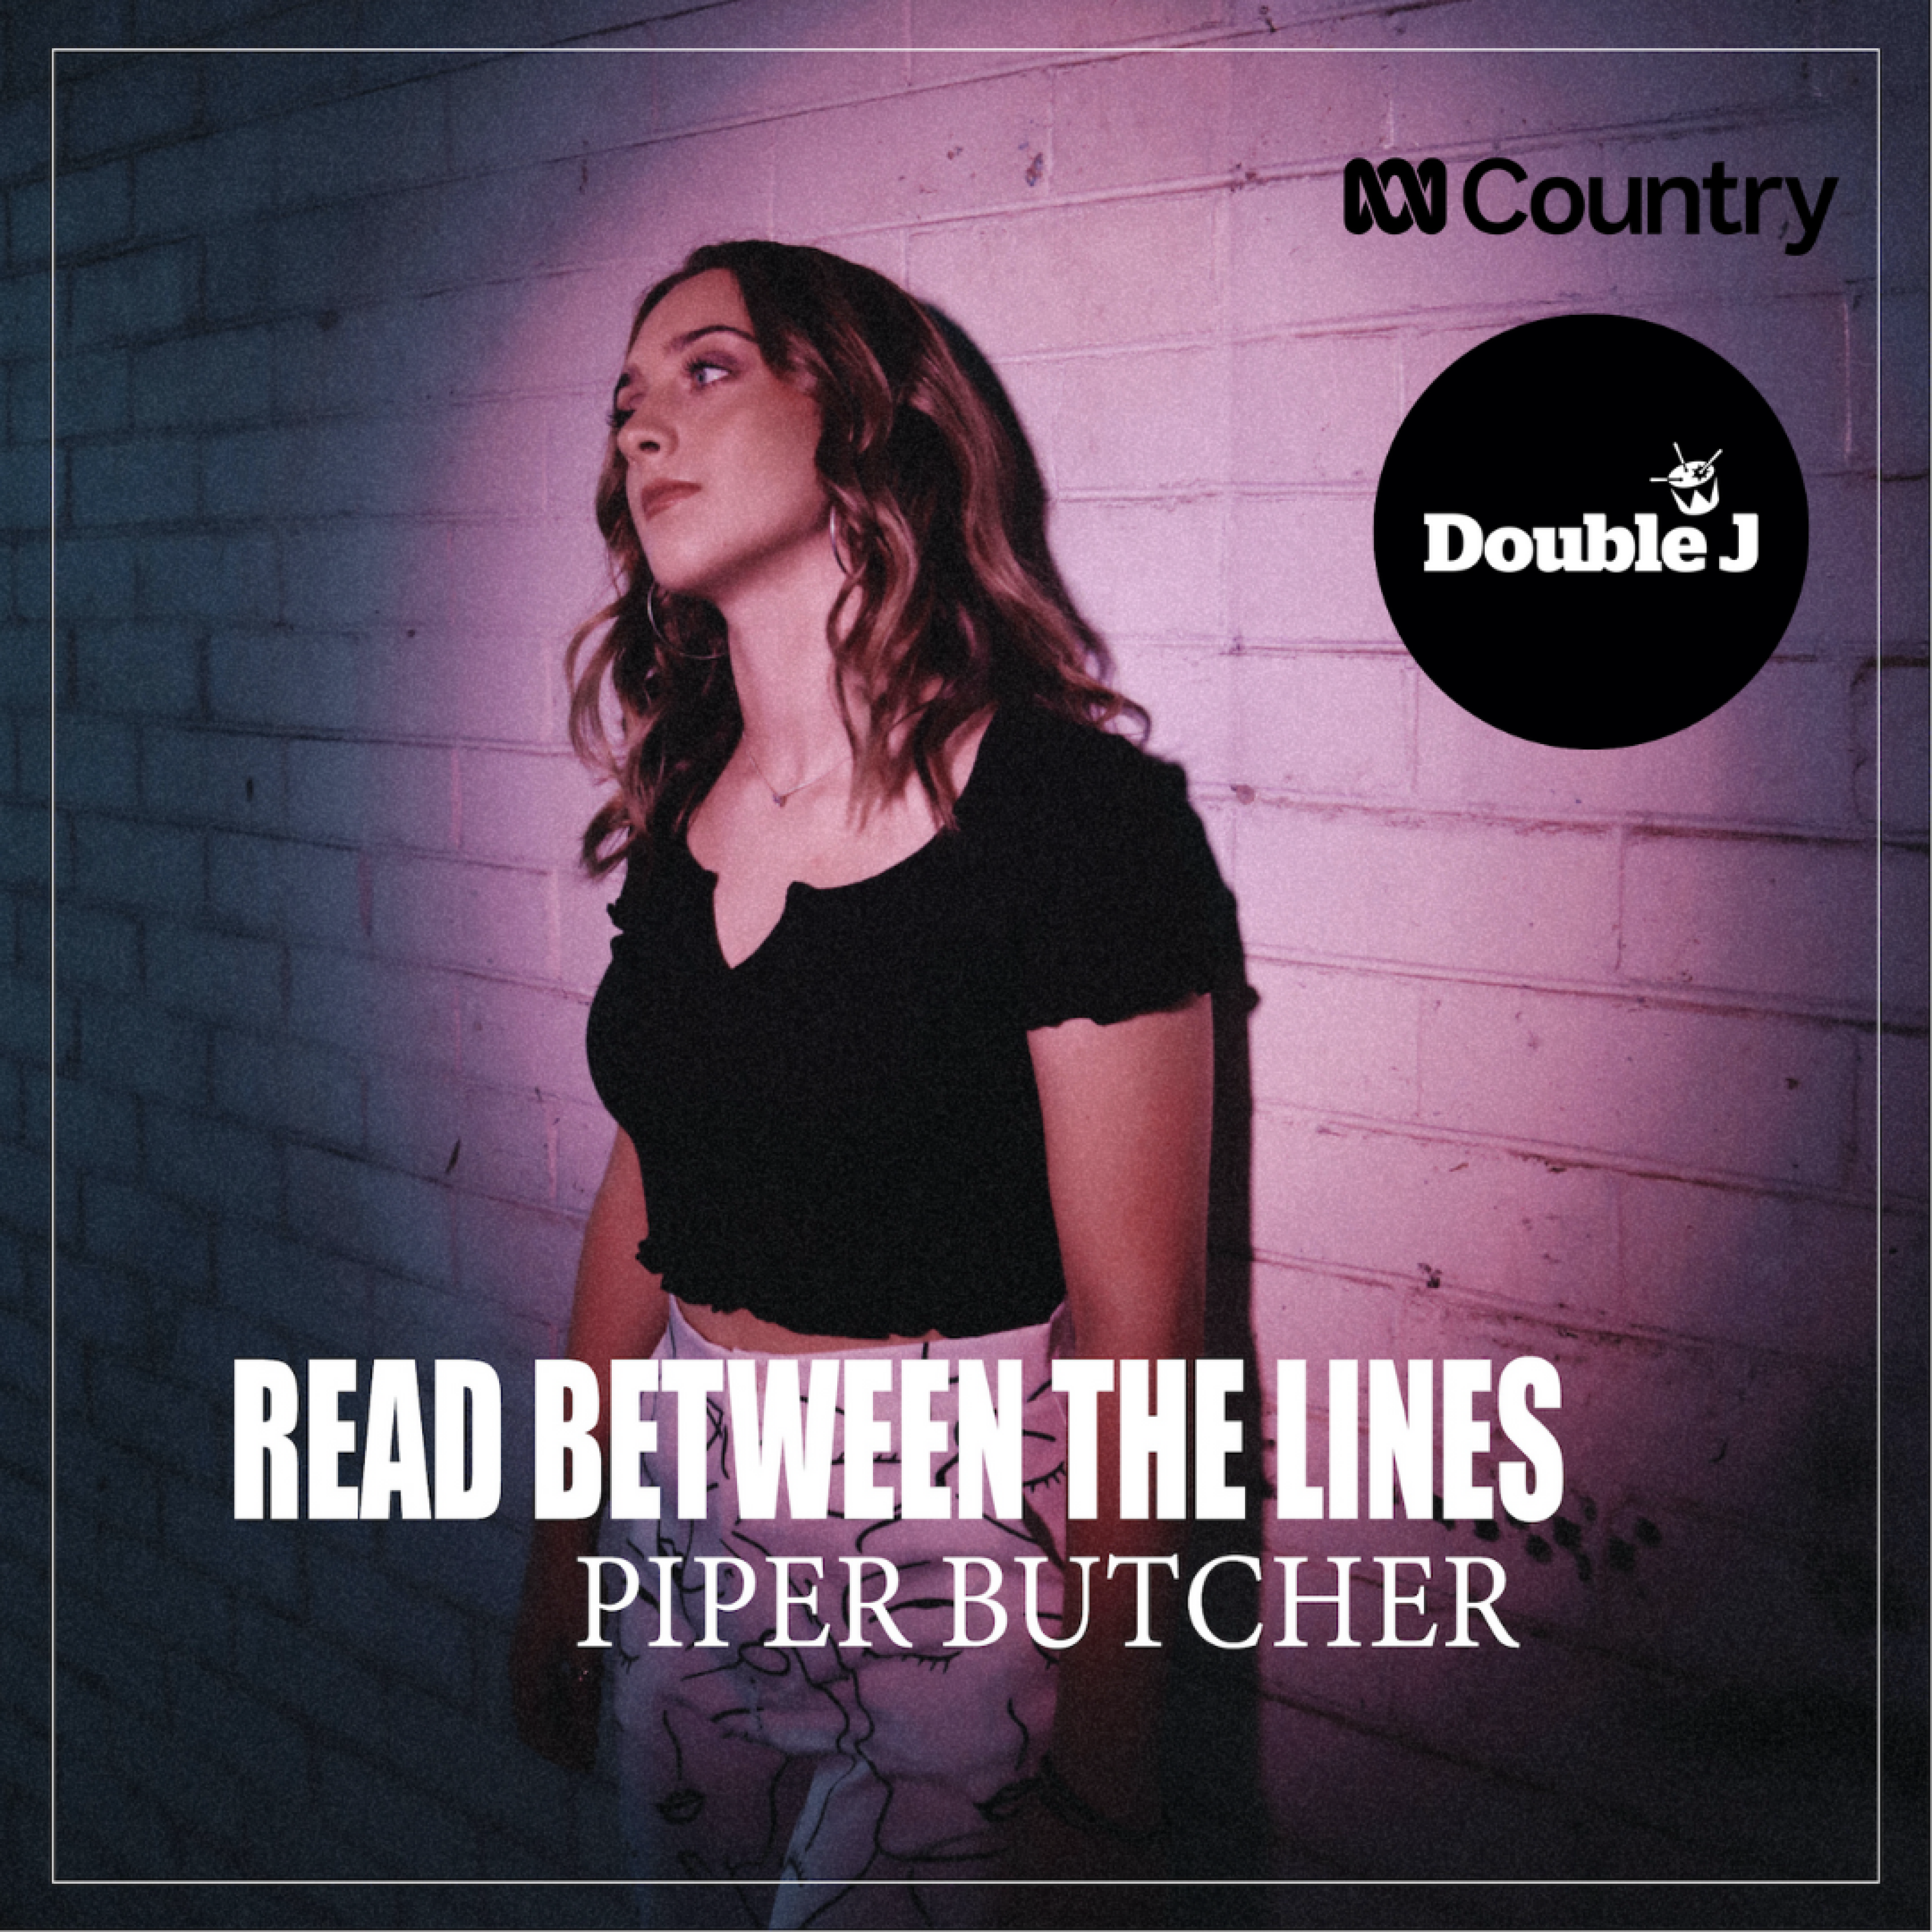 Piper Butcher - 'Read Between The Lines' Airplay via Double J/ABC Country